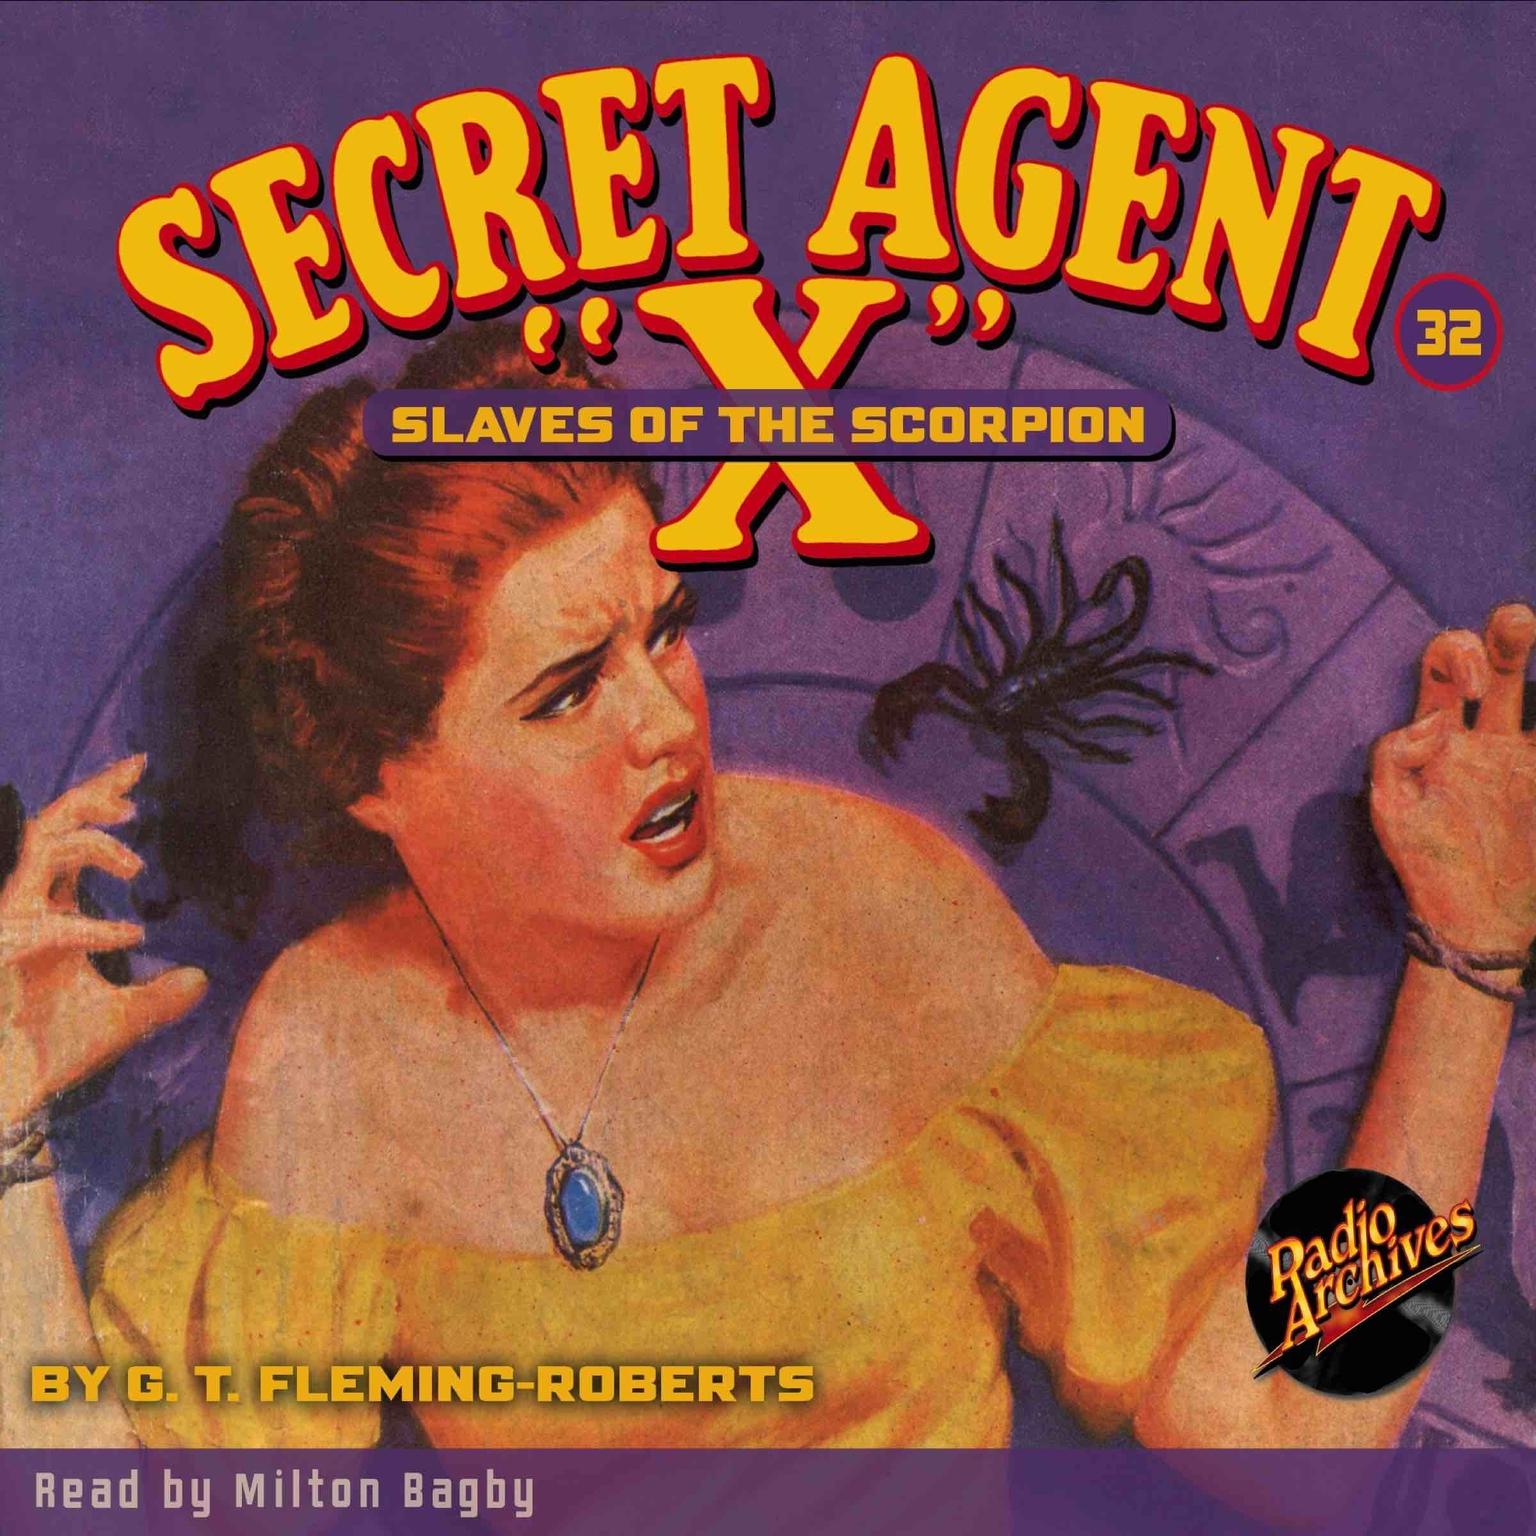 Secret Agent X: Slaves of the Scorpion Audiobook, by G. T. Fleming-Roberts